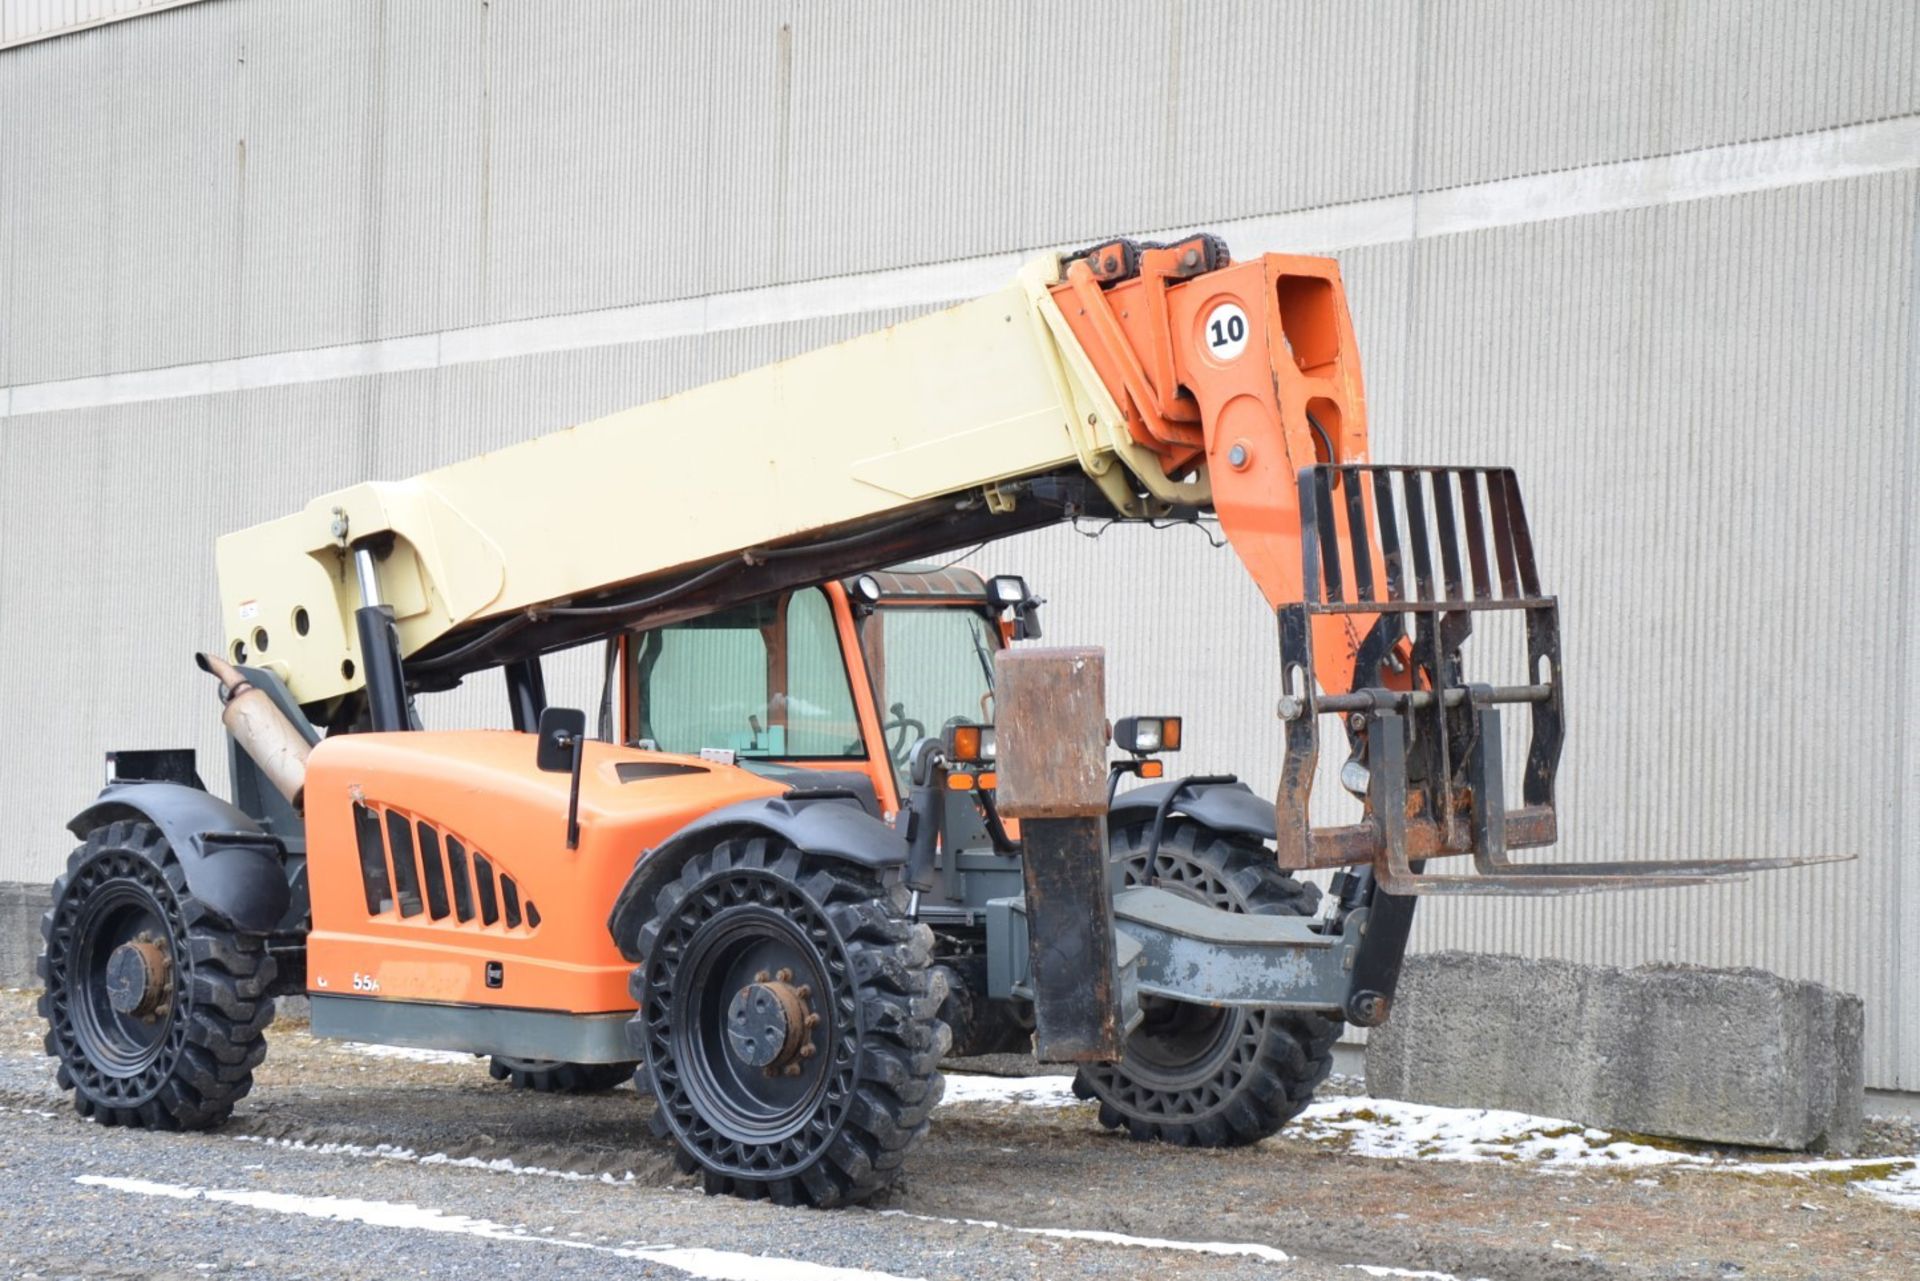 JLG (2011) G10-55A 10,000 LBS. CAPACITY DIESEL TELEHANDLER FORKLIFT WITH 56' MAX VERTICAL LIFT, - Image 19 of 23